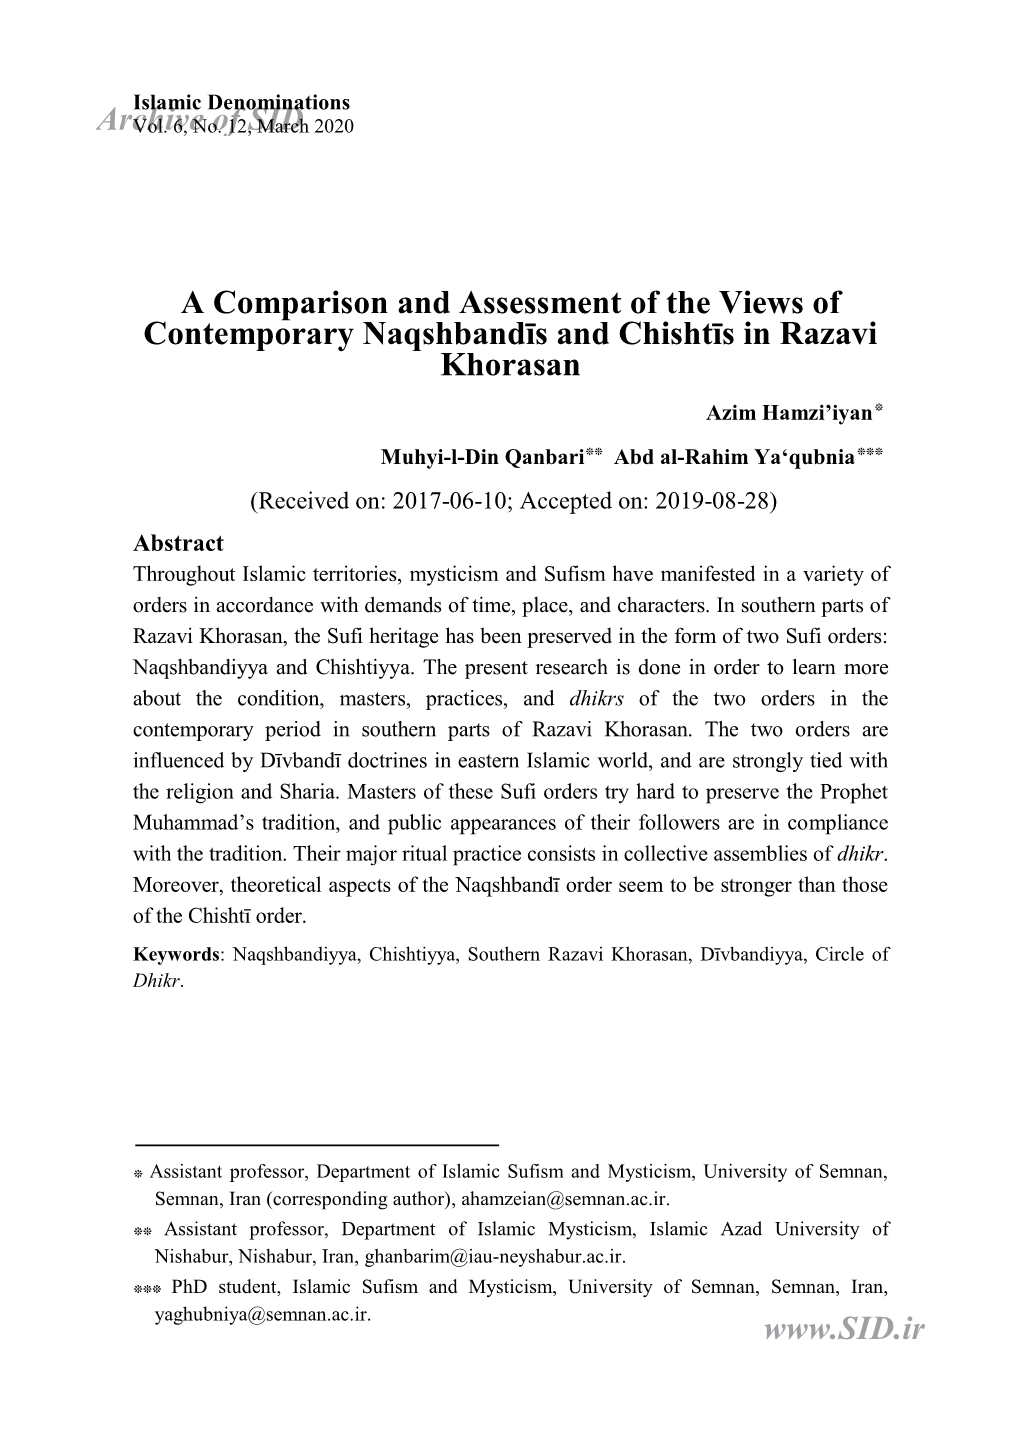 A Comparison and Assessment of the Views of Contemporary Naqshbandīs and Chishtīs in Razavi Khorasan